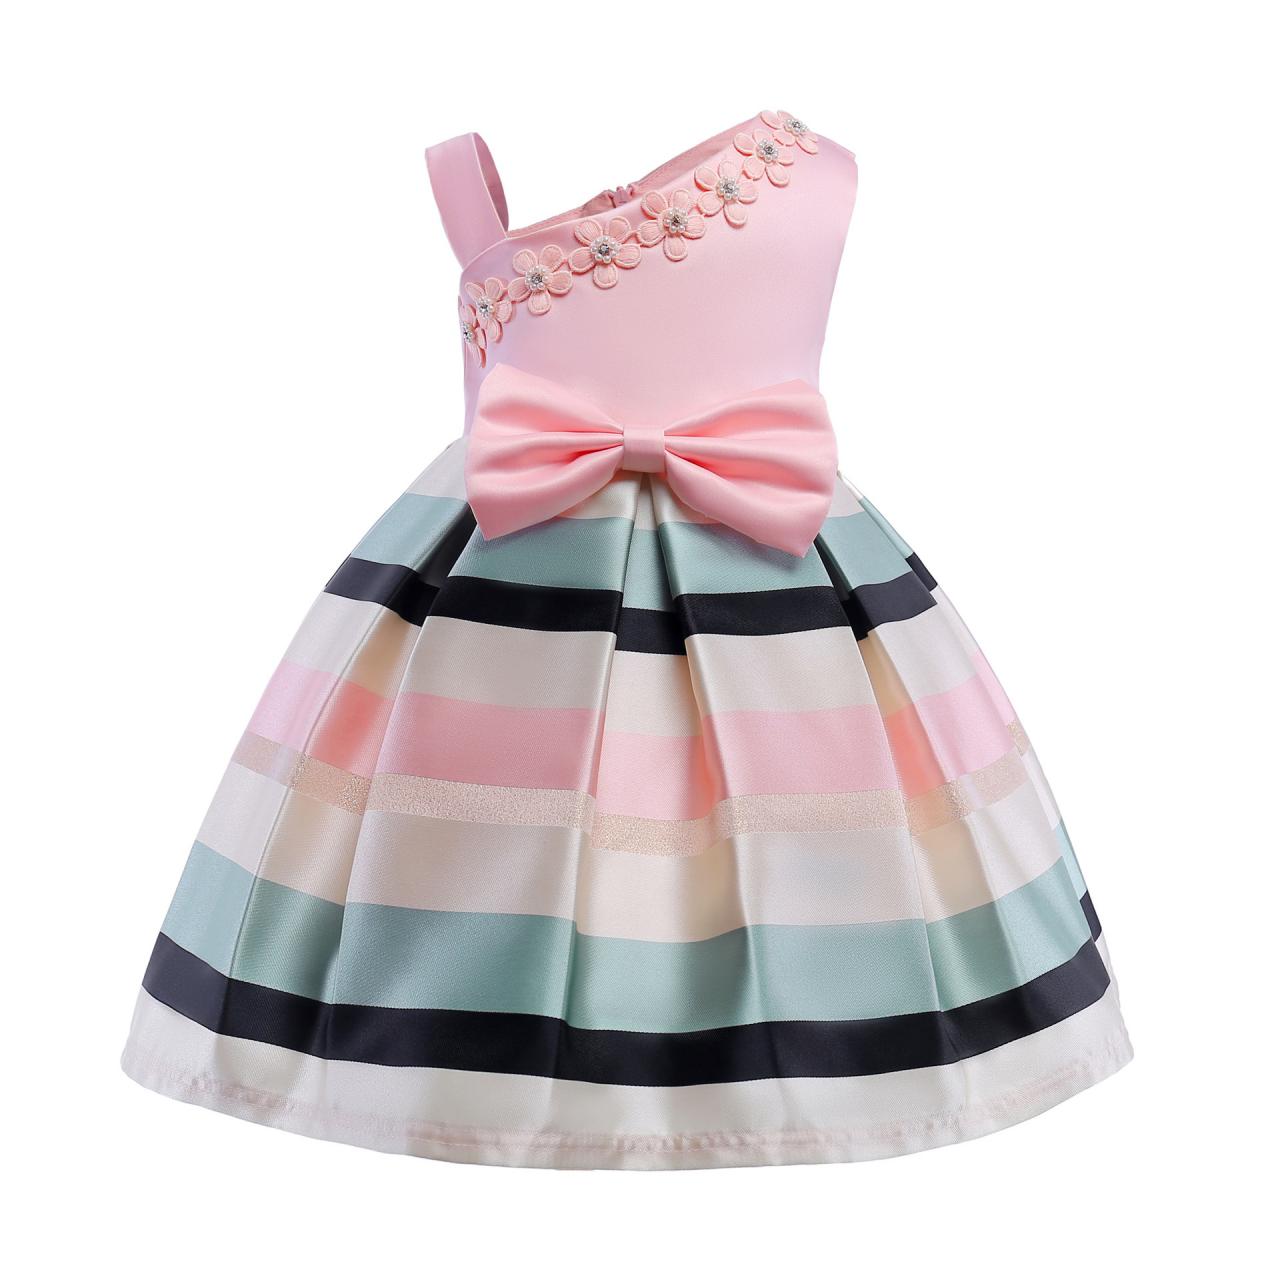 Pink Flower Girl Dresses For Weddings,first Communion Dresses For Girls With Bow